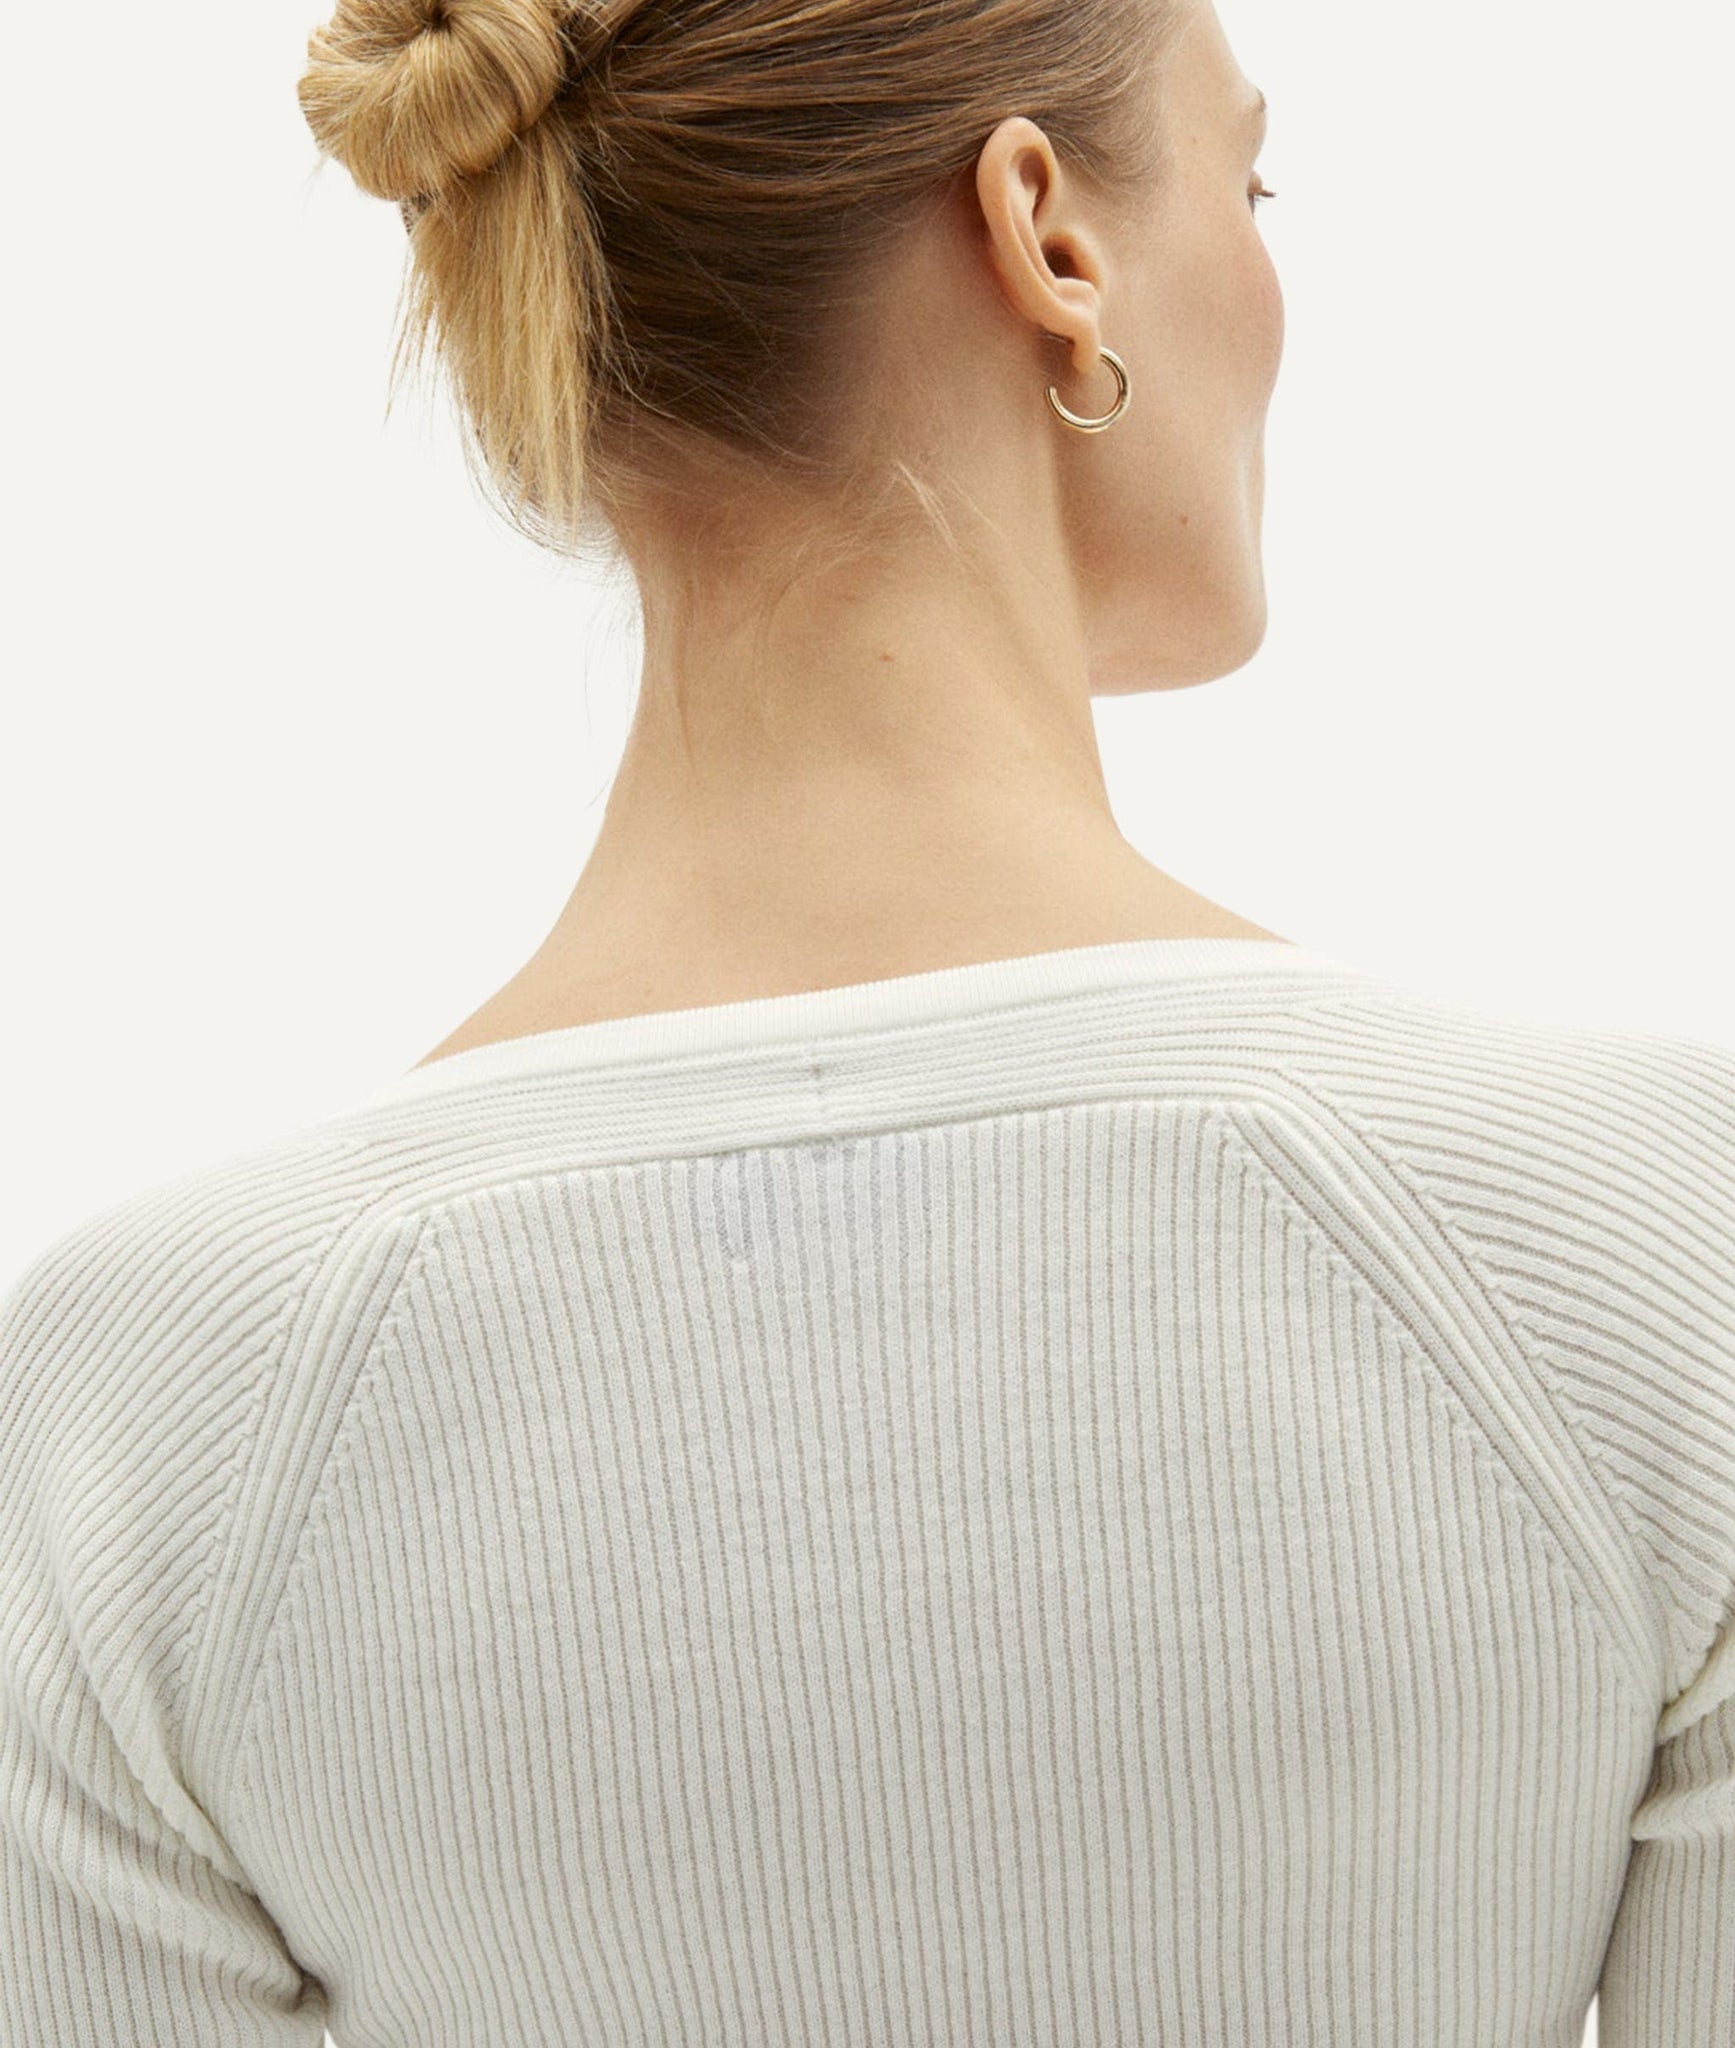 The Organic Cotton Top with Special Neckline